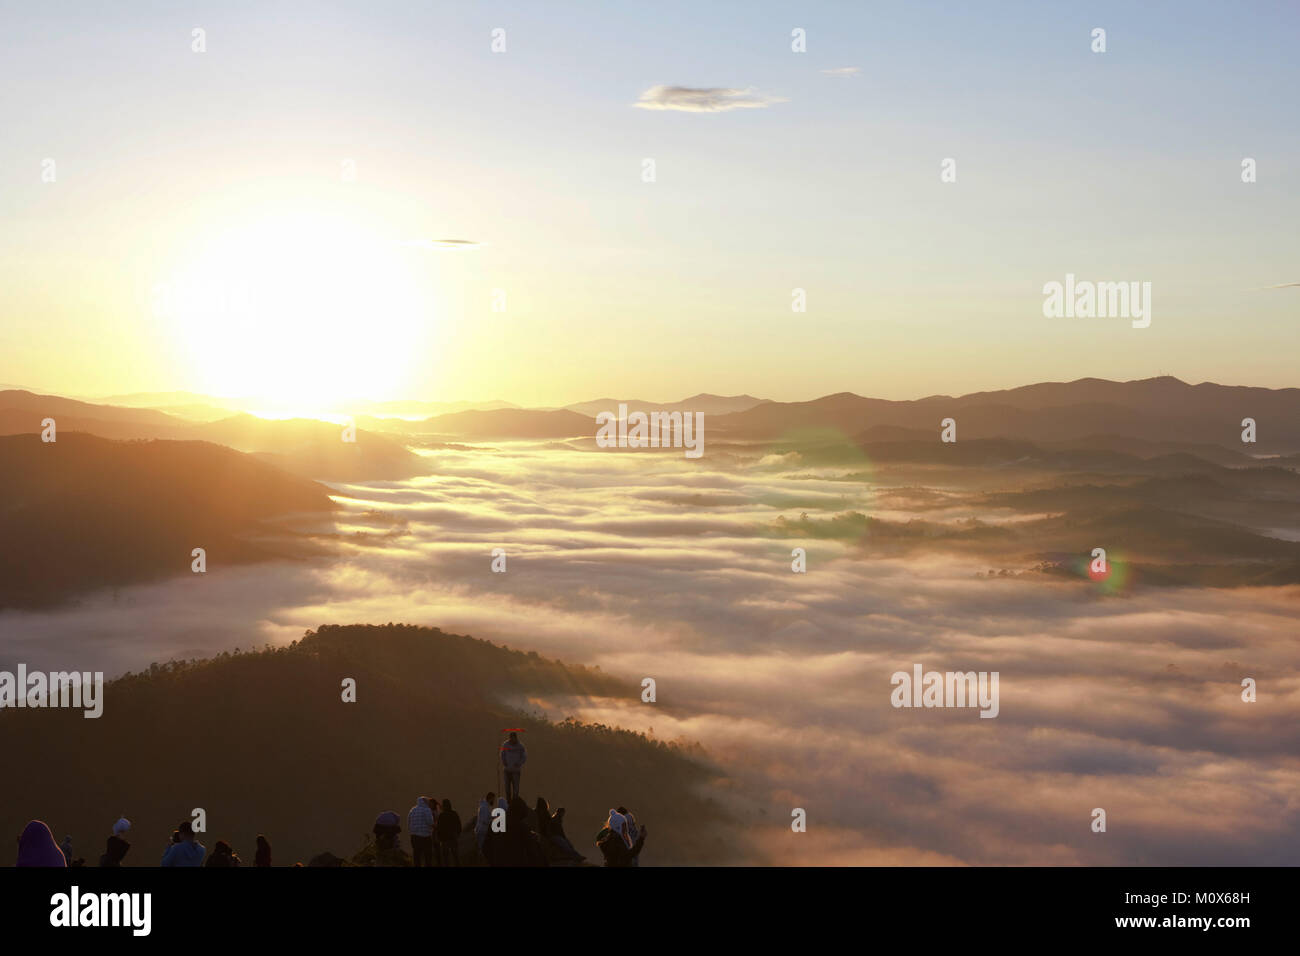 Campers watching the sunrise, while clouds cover the city. Stock Photo